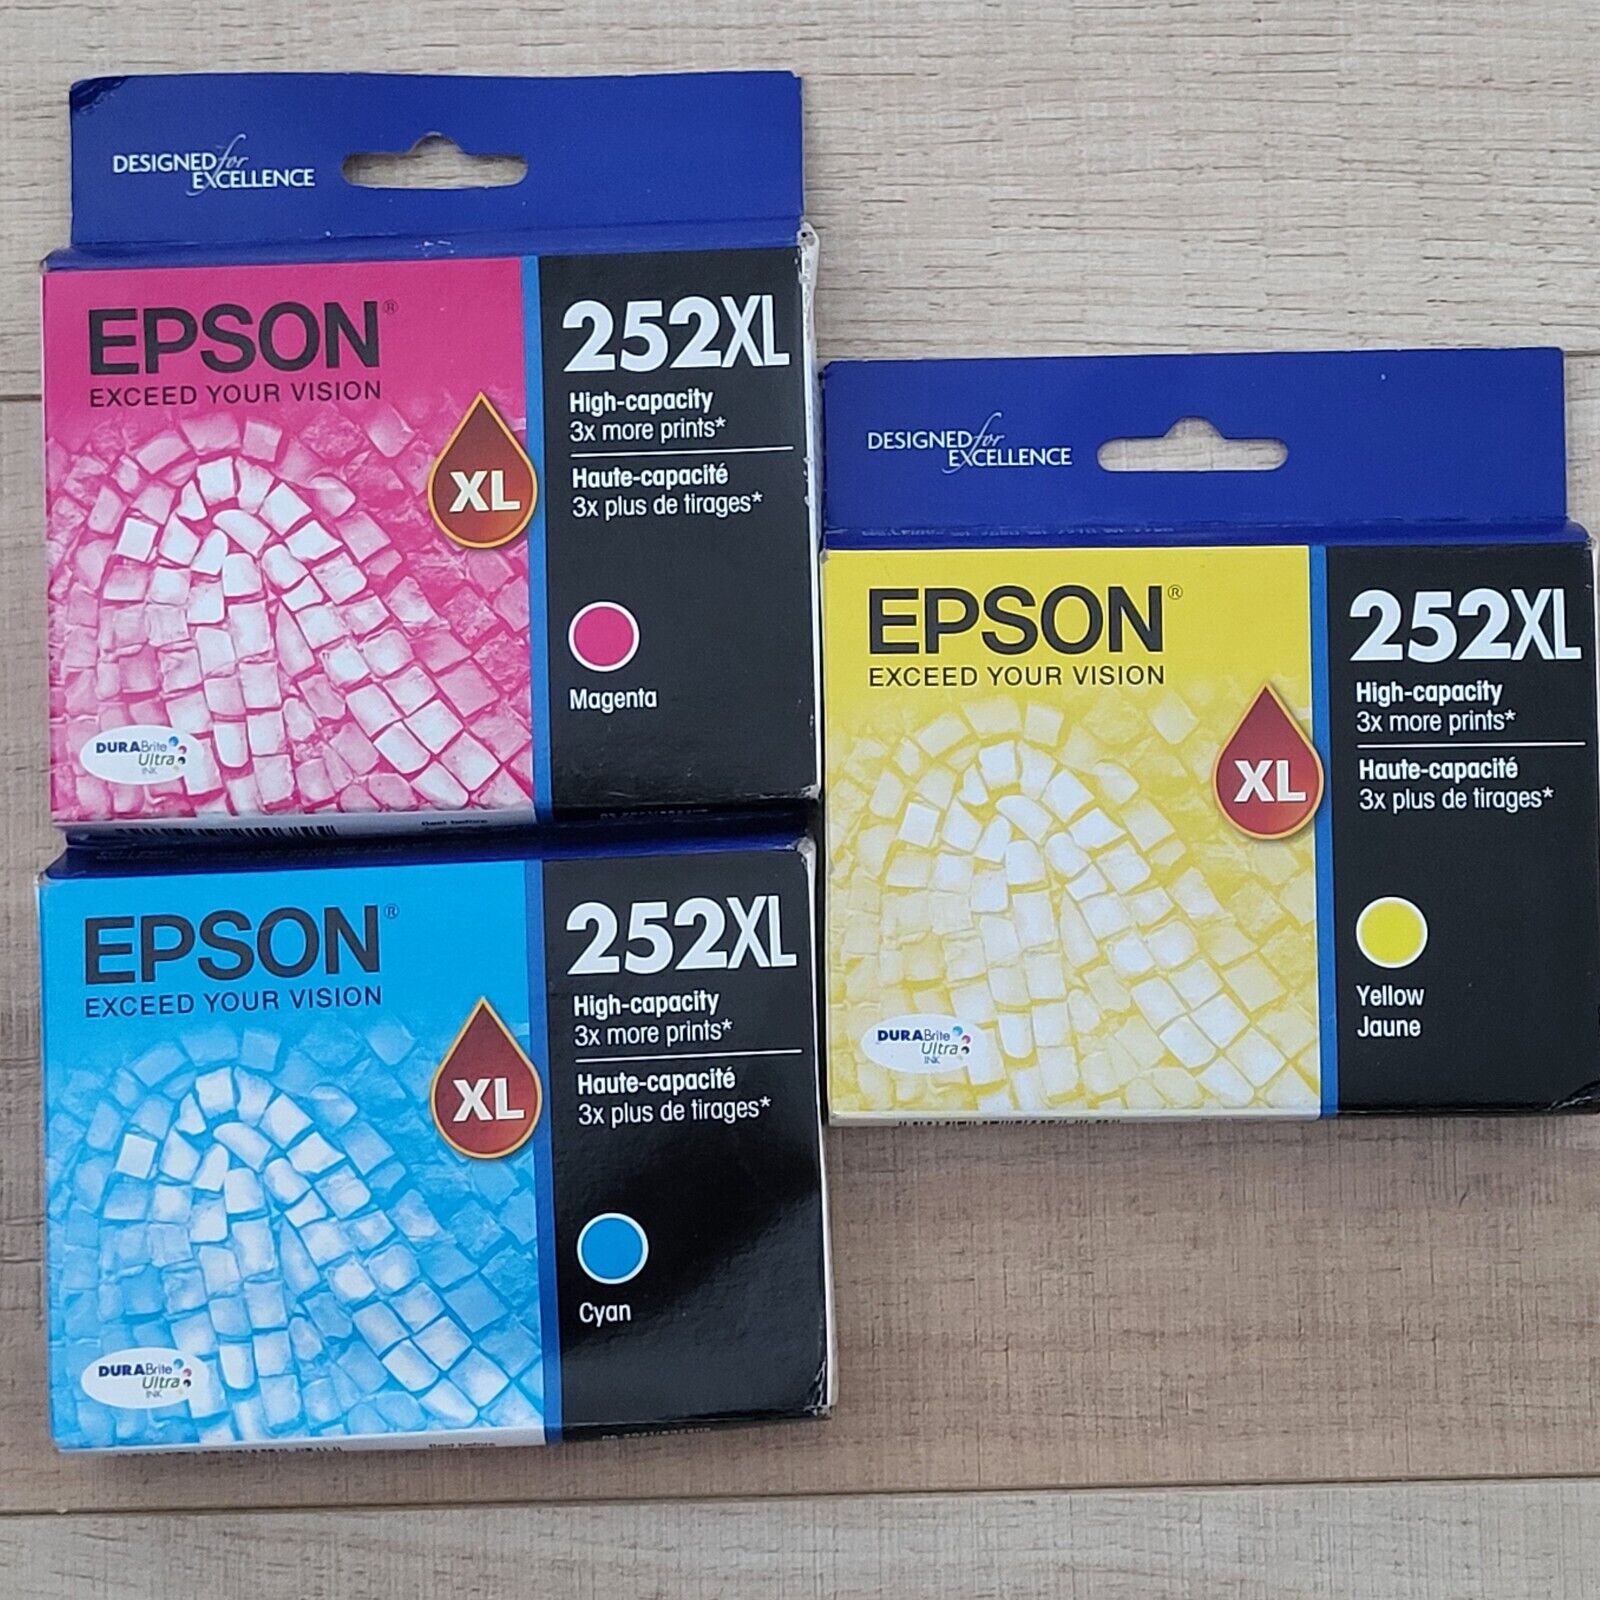 Epson 252XL Cyan Magenta Yellow 252 Color Ink cartridges Exp 2021 Made in USA